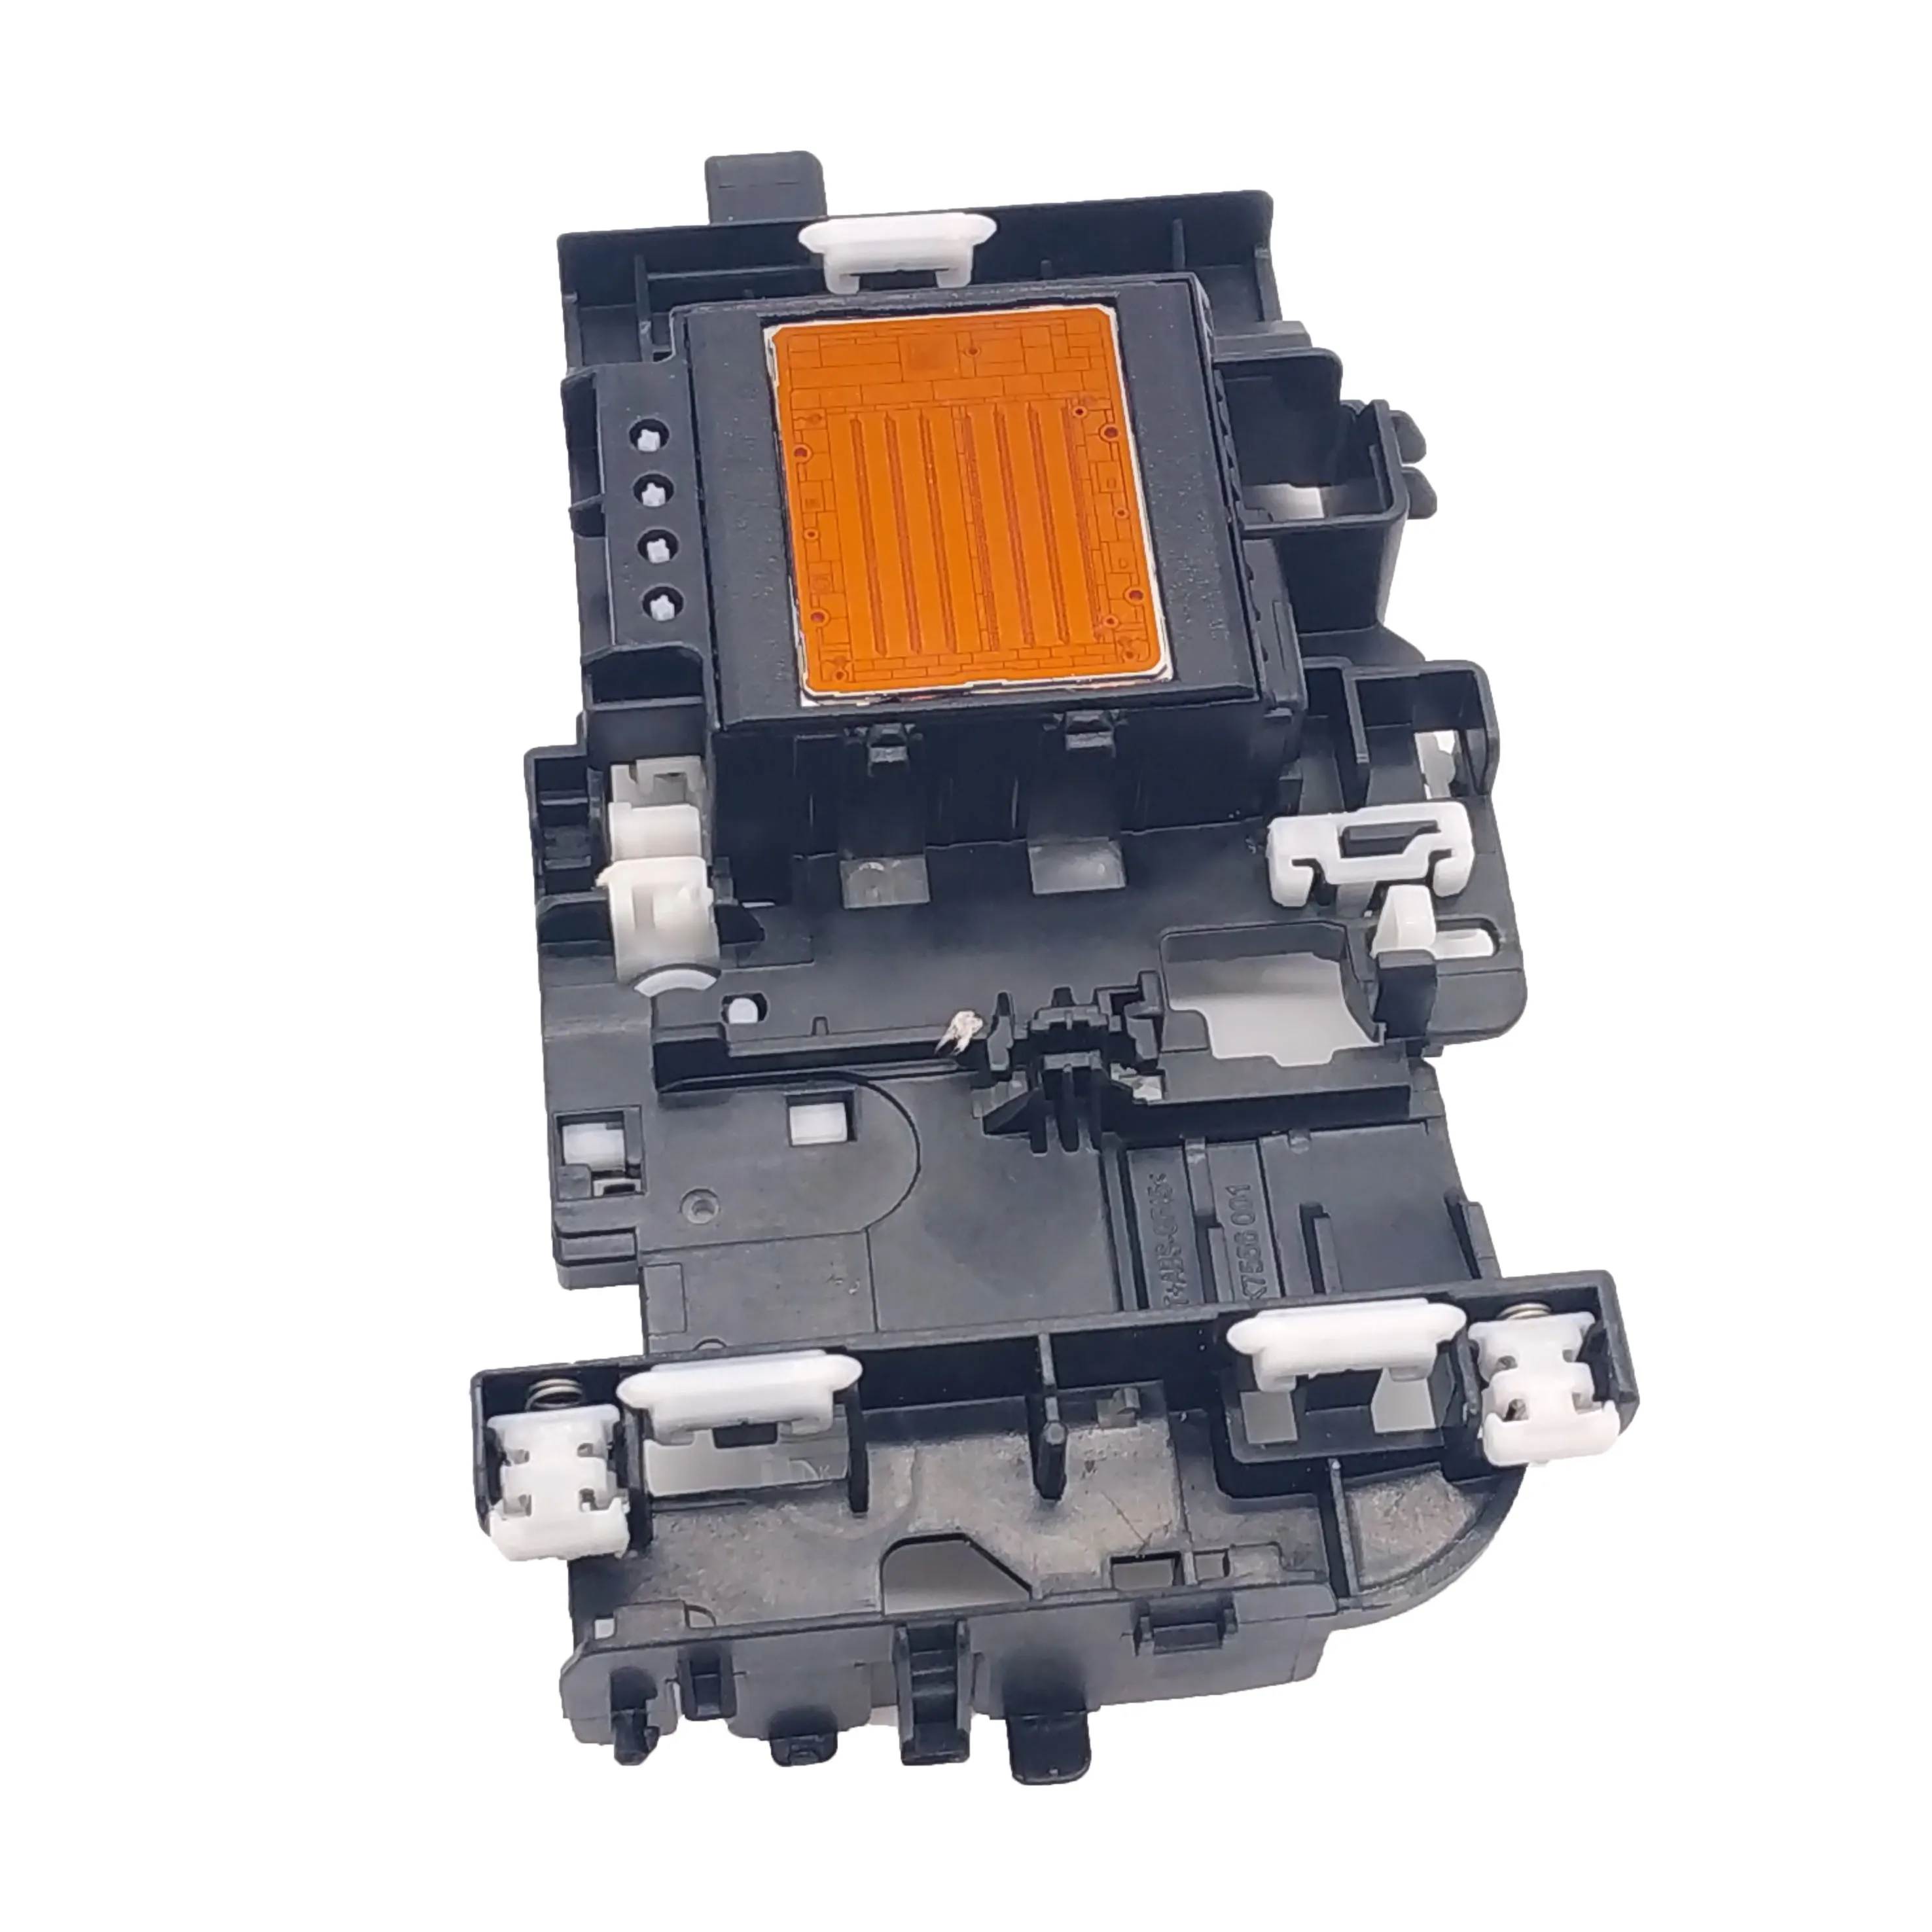 

Print Head J100 Fits For Brother MFC-T800W DCP-J102 MFC-J200 J205 DCP-T500W DCP-T700W DCP-T300 DCP-J105 DCP-J100